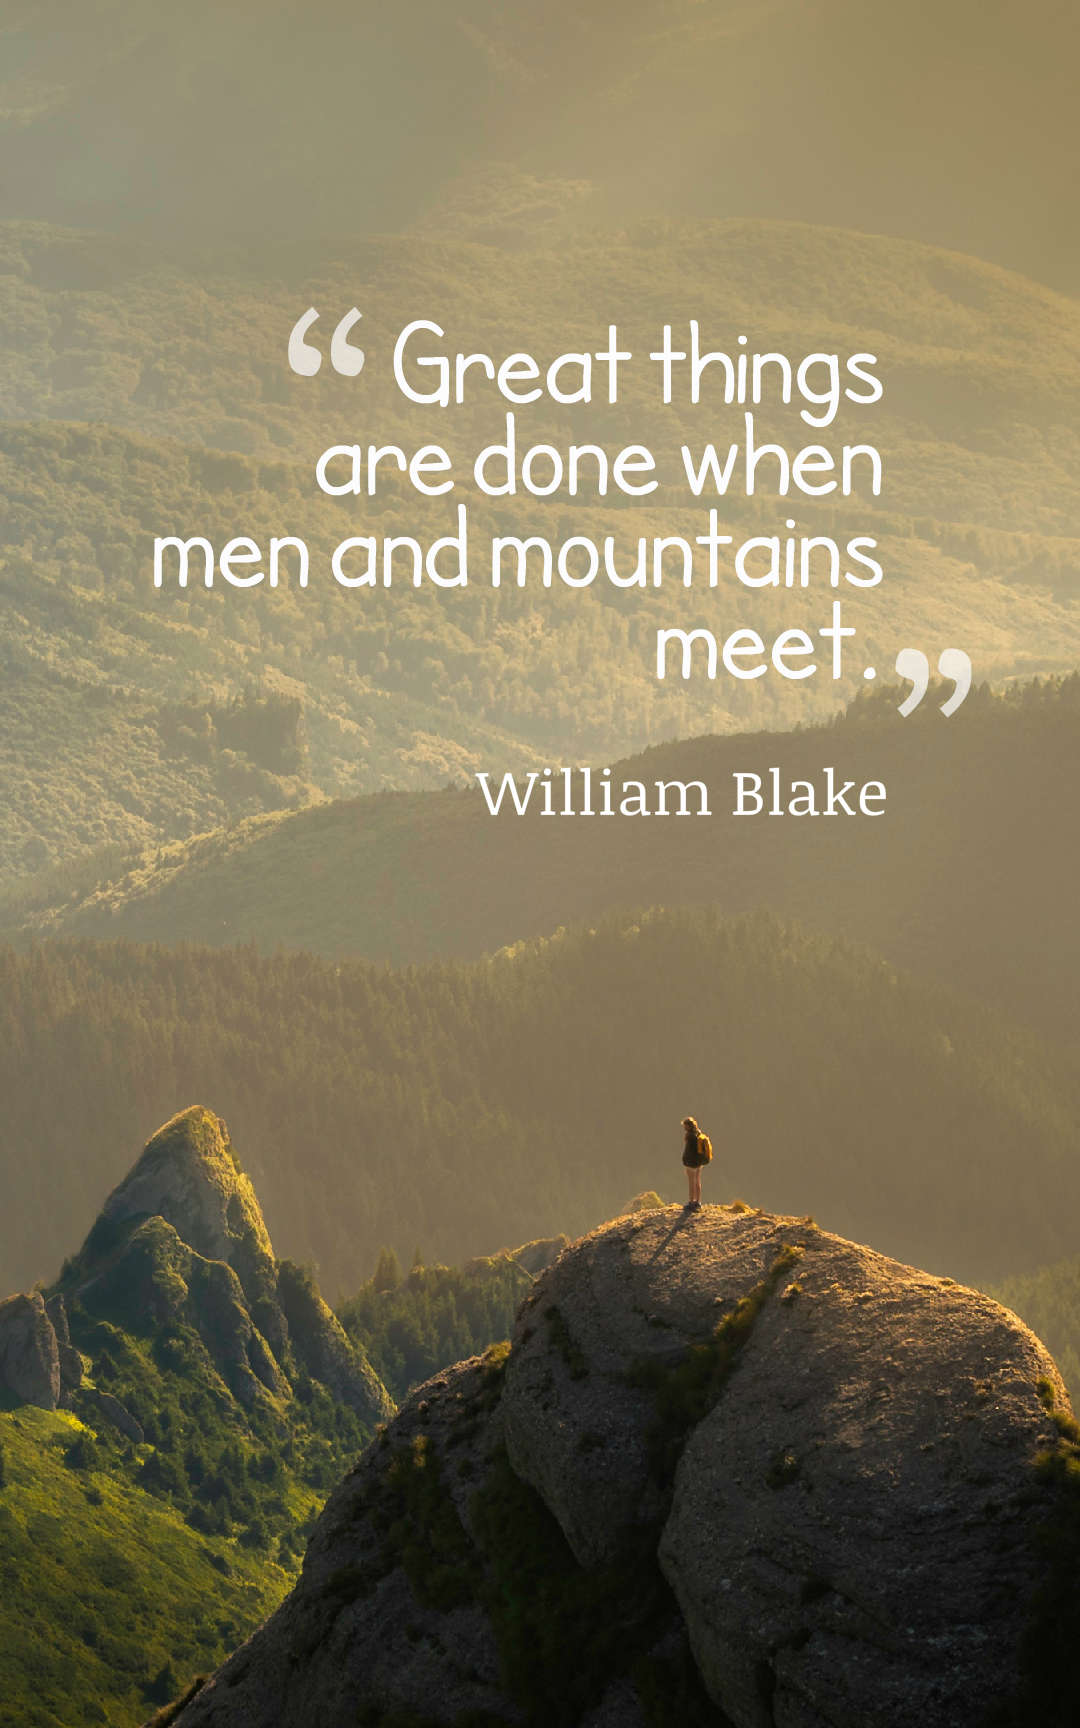 Great things are done when men and mountains meet.